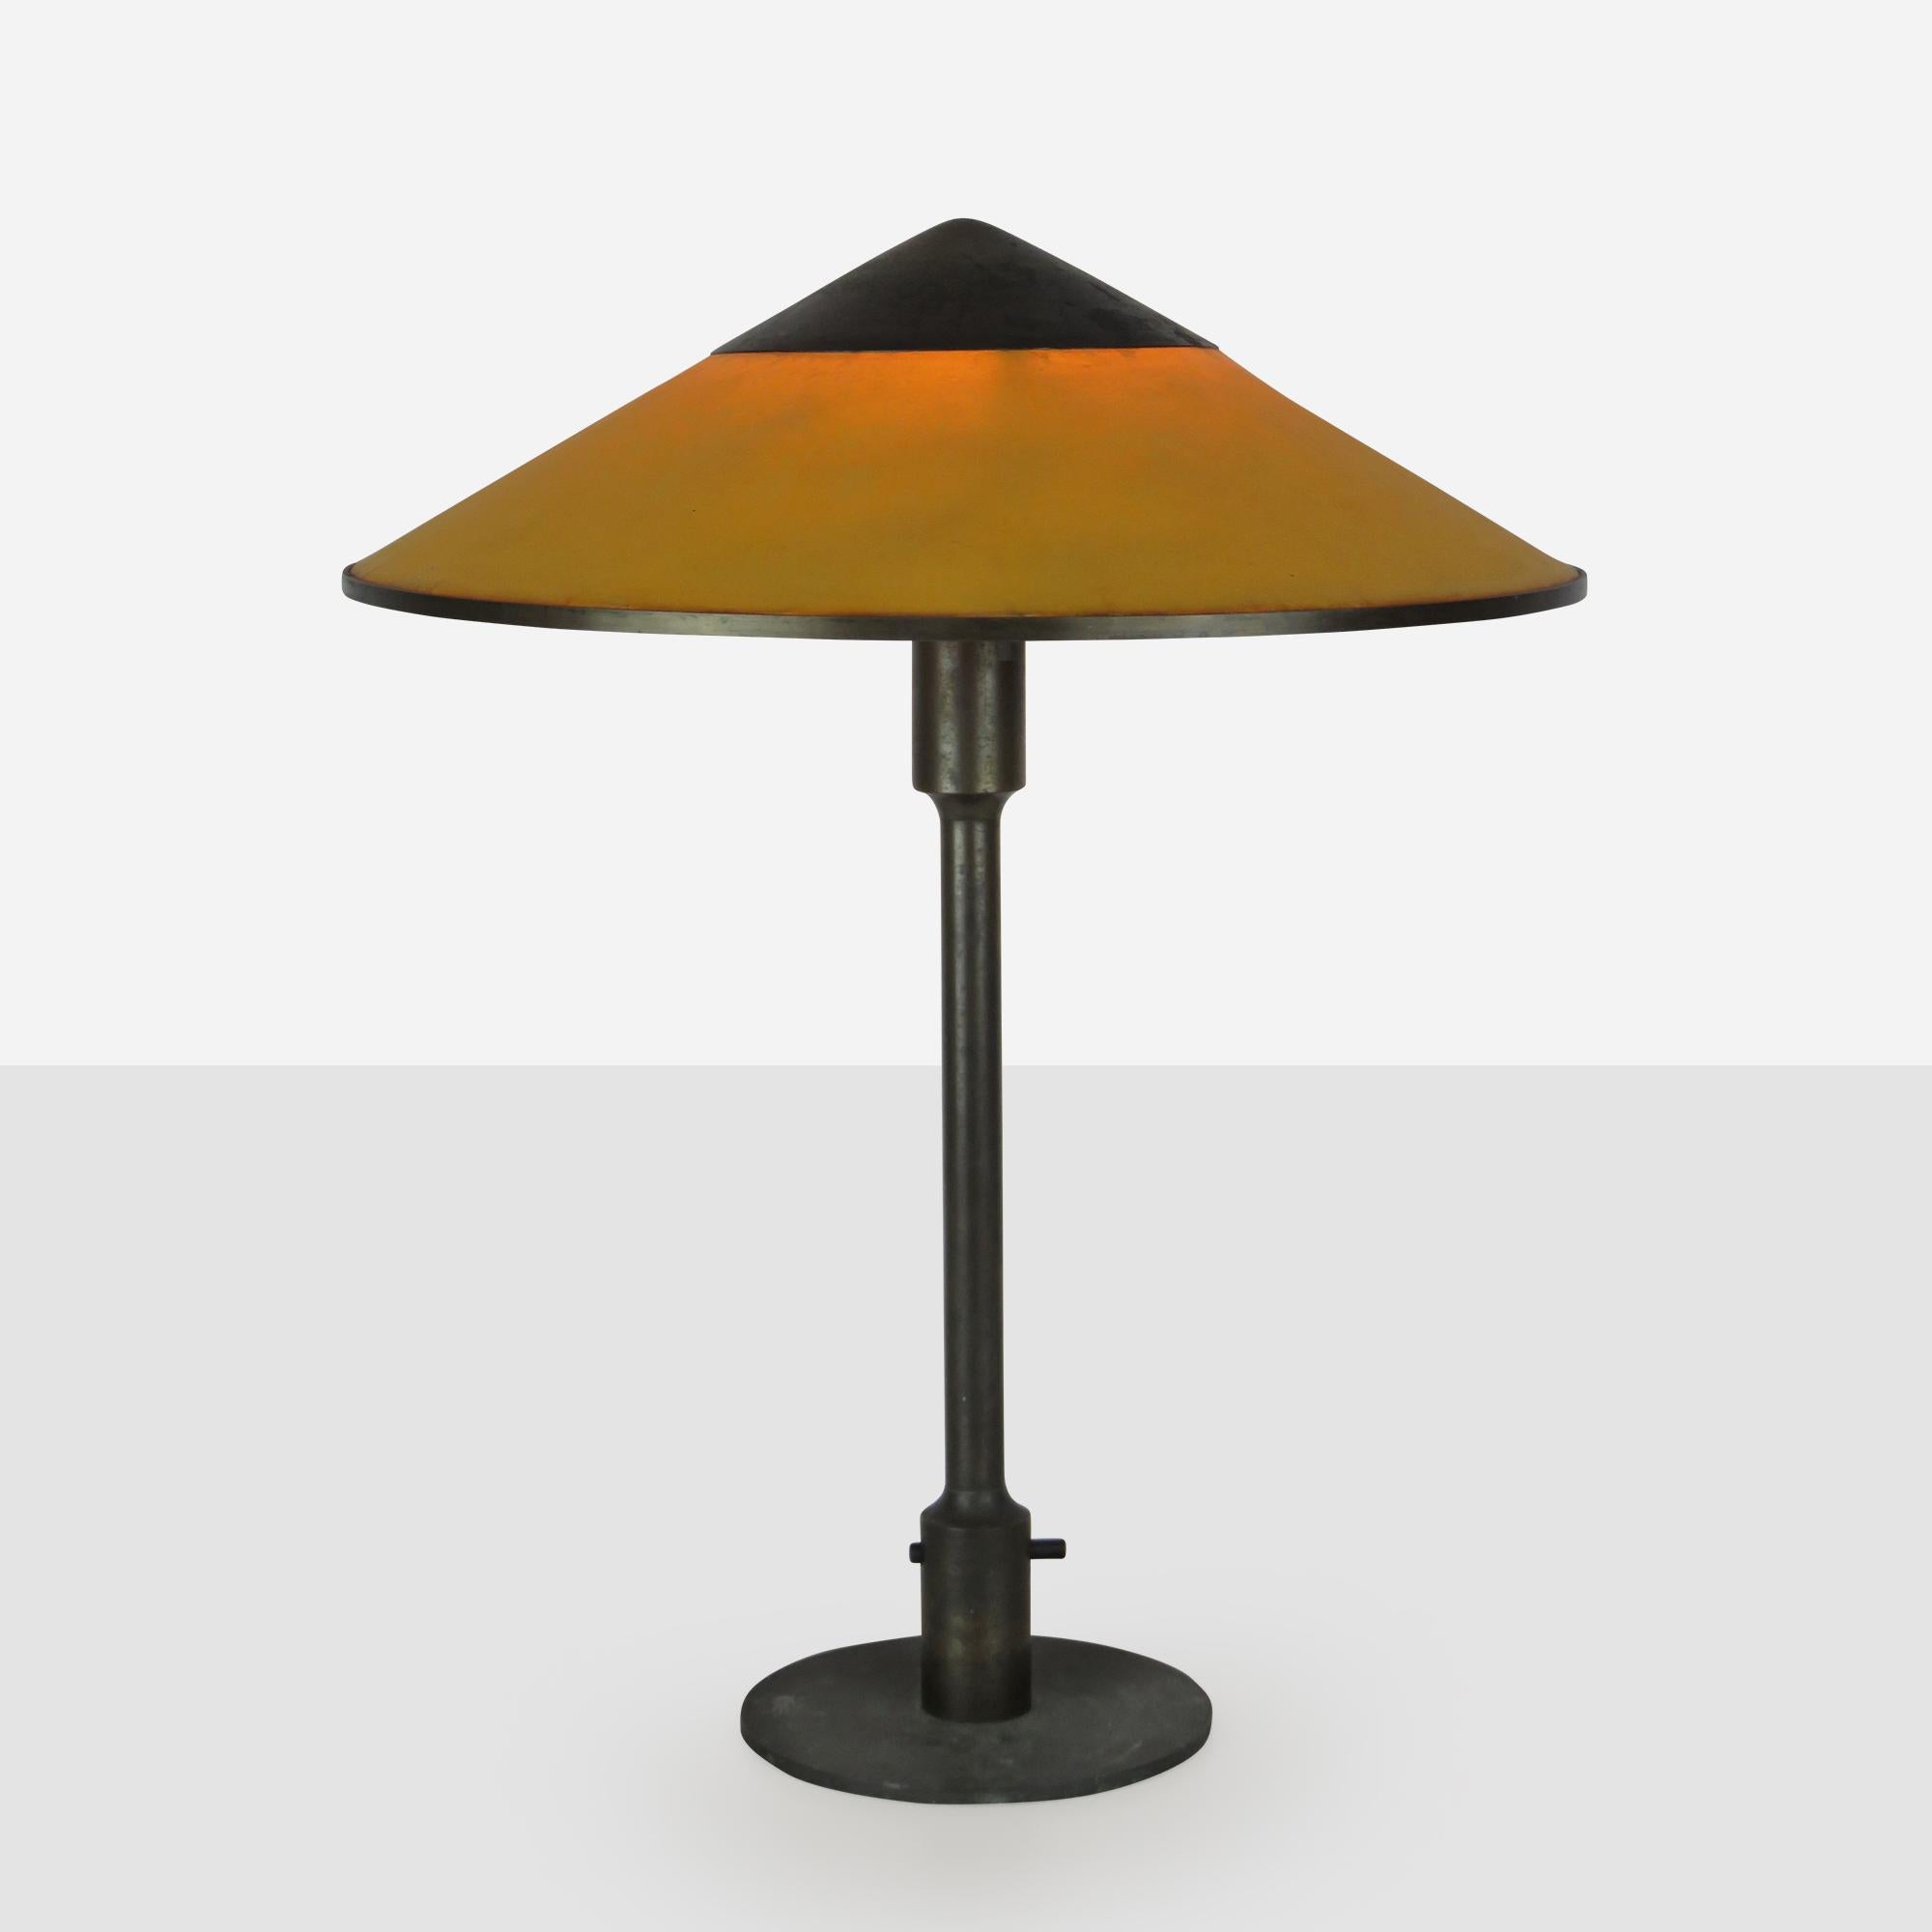 An early Kongelys table lamp by Niels Rasmussen Thykier for Fog and Mørup. The fixture is made of brass and copper with a continuous switch and an oil-treated paper shade in a warm yellow. New wiring and plug.